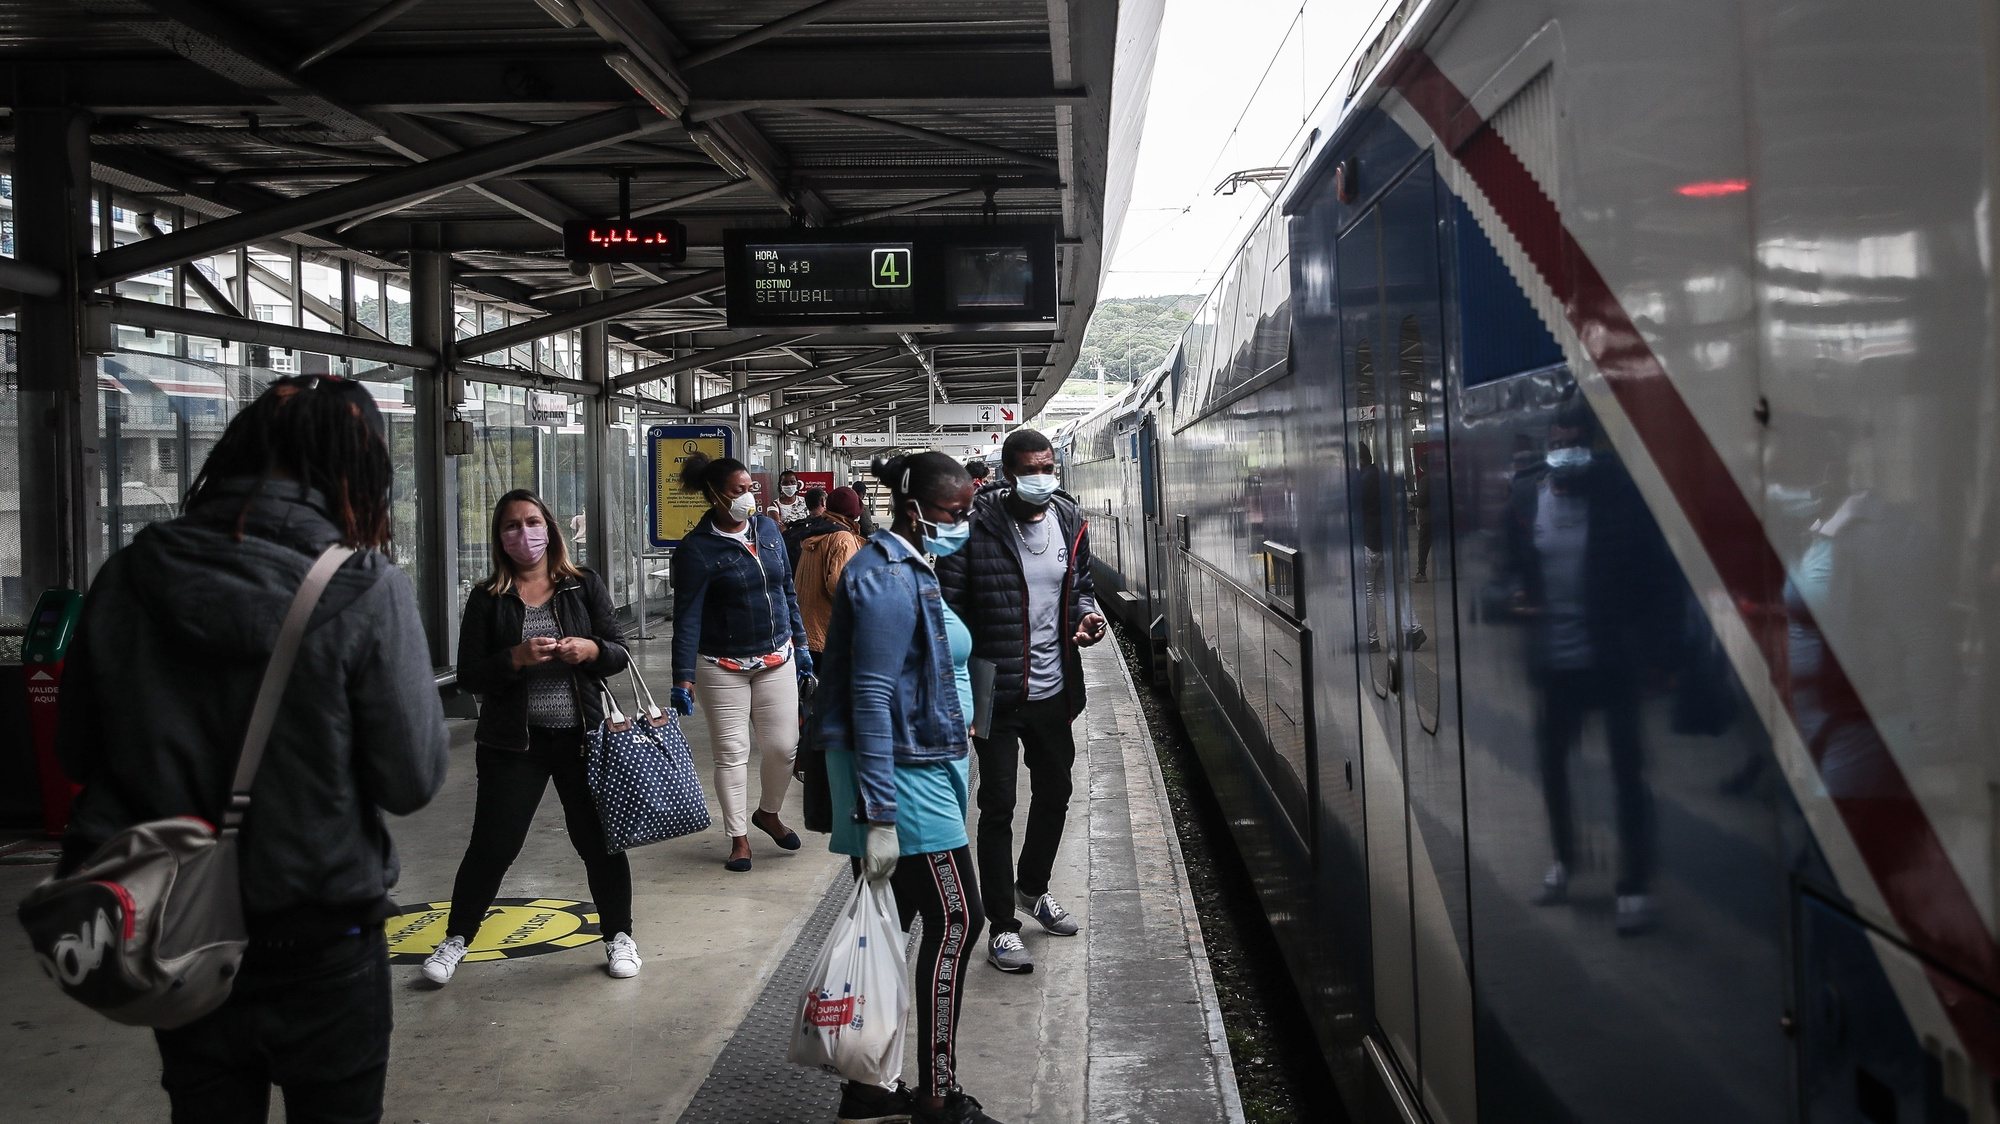 People wait to get on a Fertagus train at Sete Rios station, Portugal, 4 May 2020. Portugal is in a calamity after three consecutive periods in a state of emergency. In this new period, the use of masks on public transport will be mandatory. MÁRIO CRUZ/LUSA